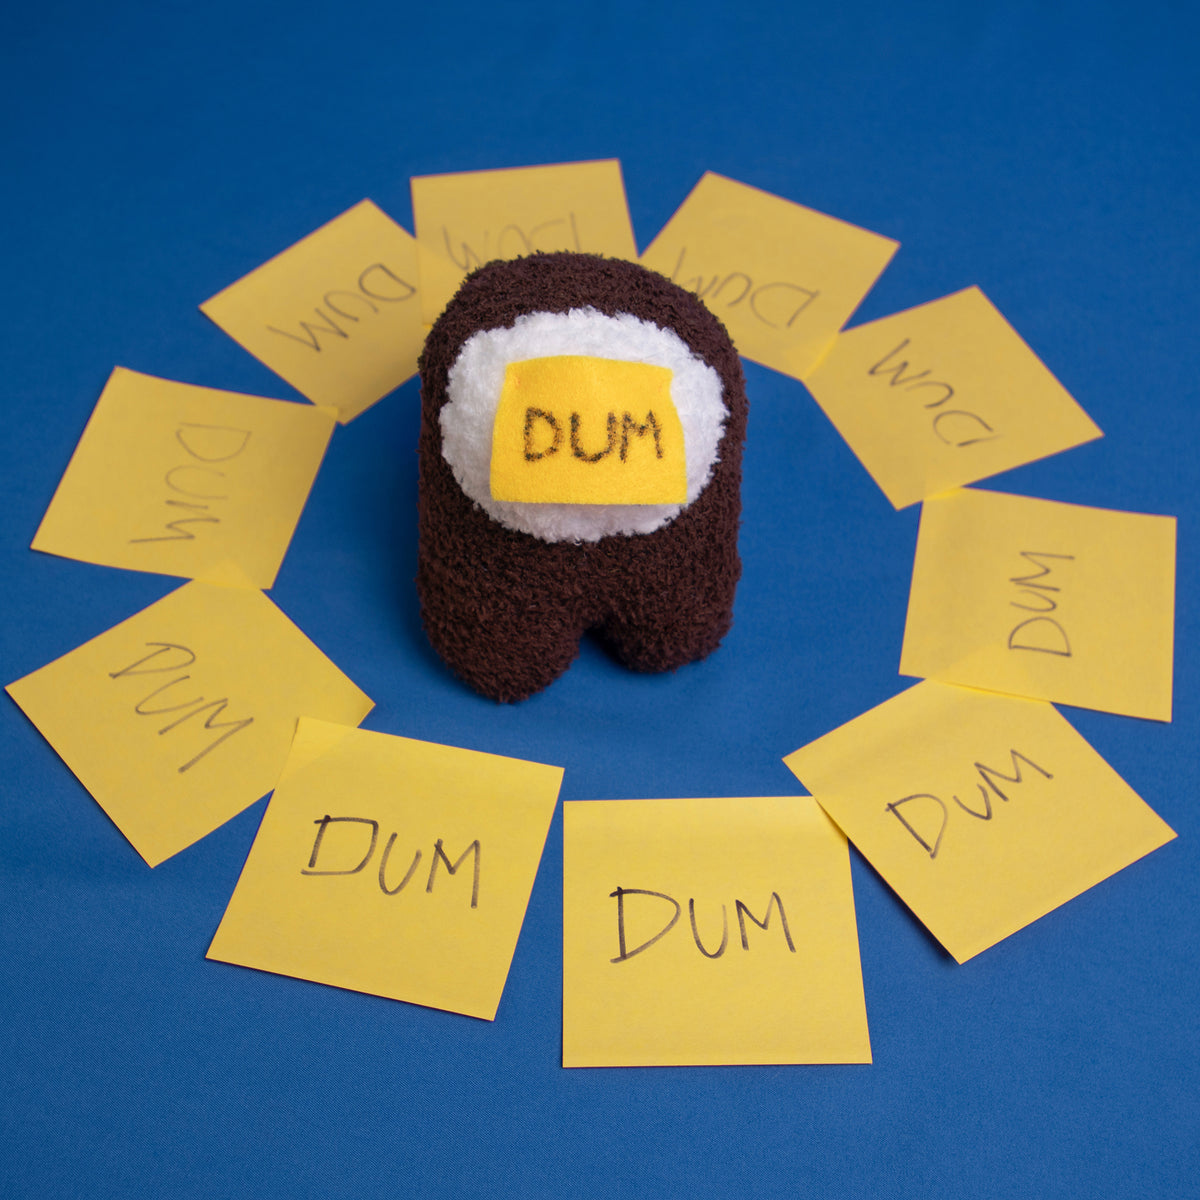 An overhead photograph of the DUM brown Crewmate surrounded in a circle of yellow sticky notes that all say DUM.